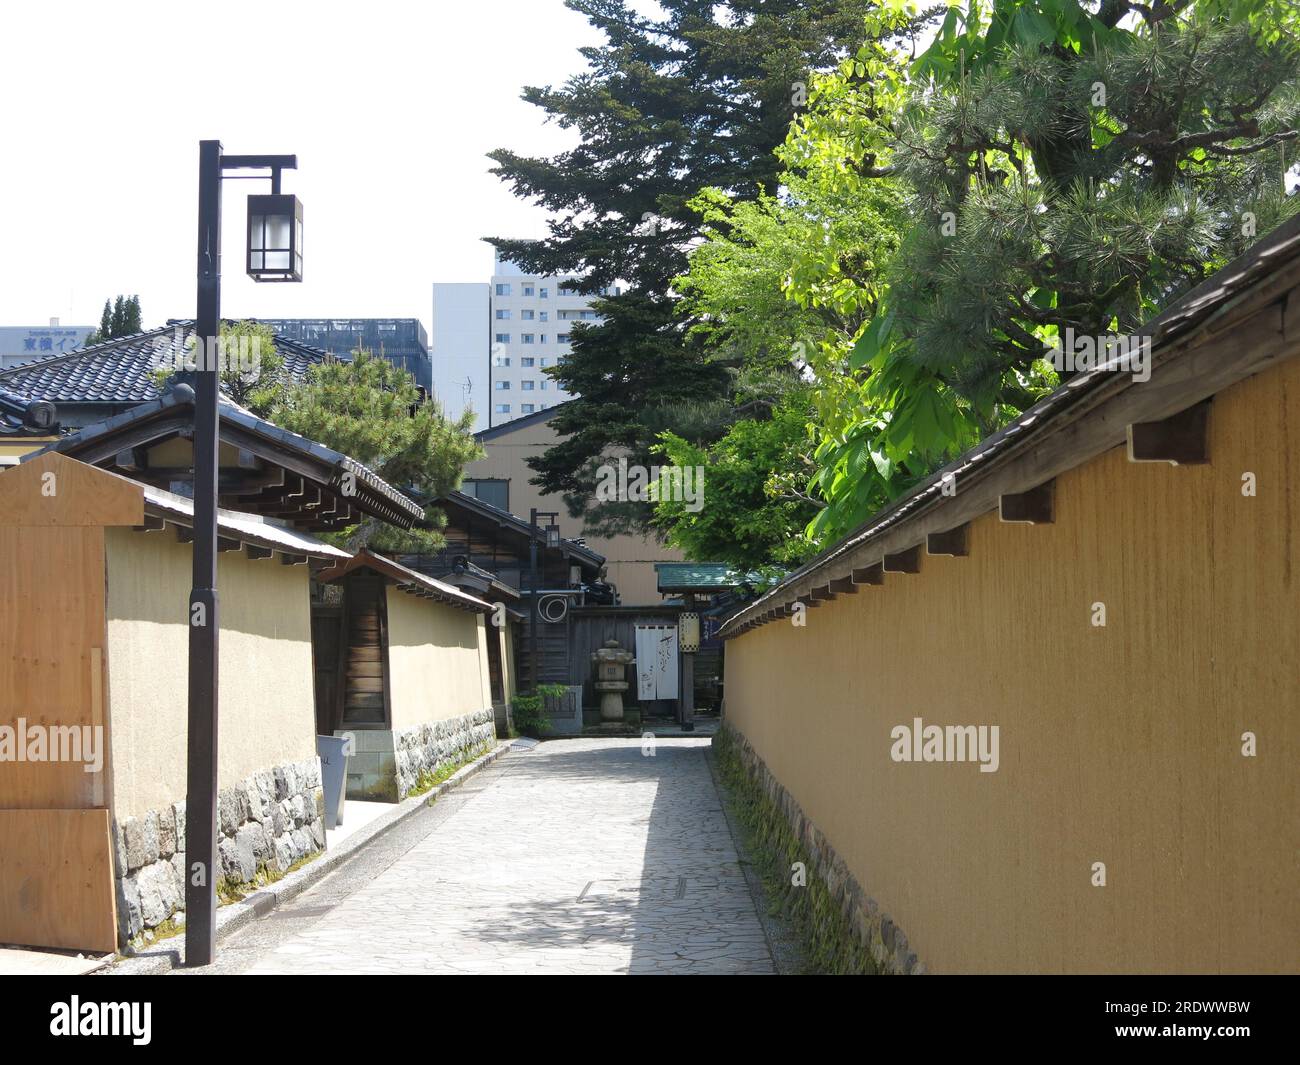 High yellow earthen walls with small doorways characterise the district of Nagamachi in Kanazawa, an historic area where the Samurai class lived. Stock Photo